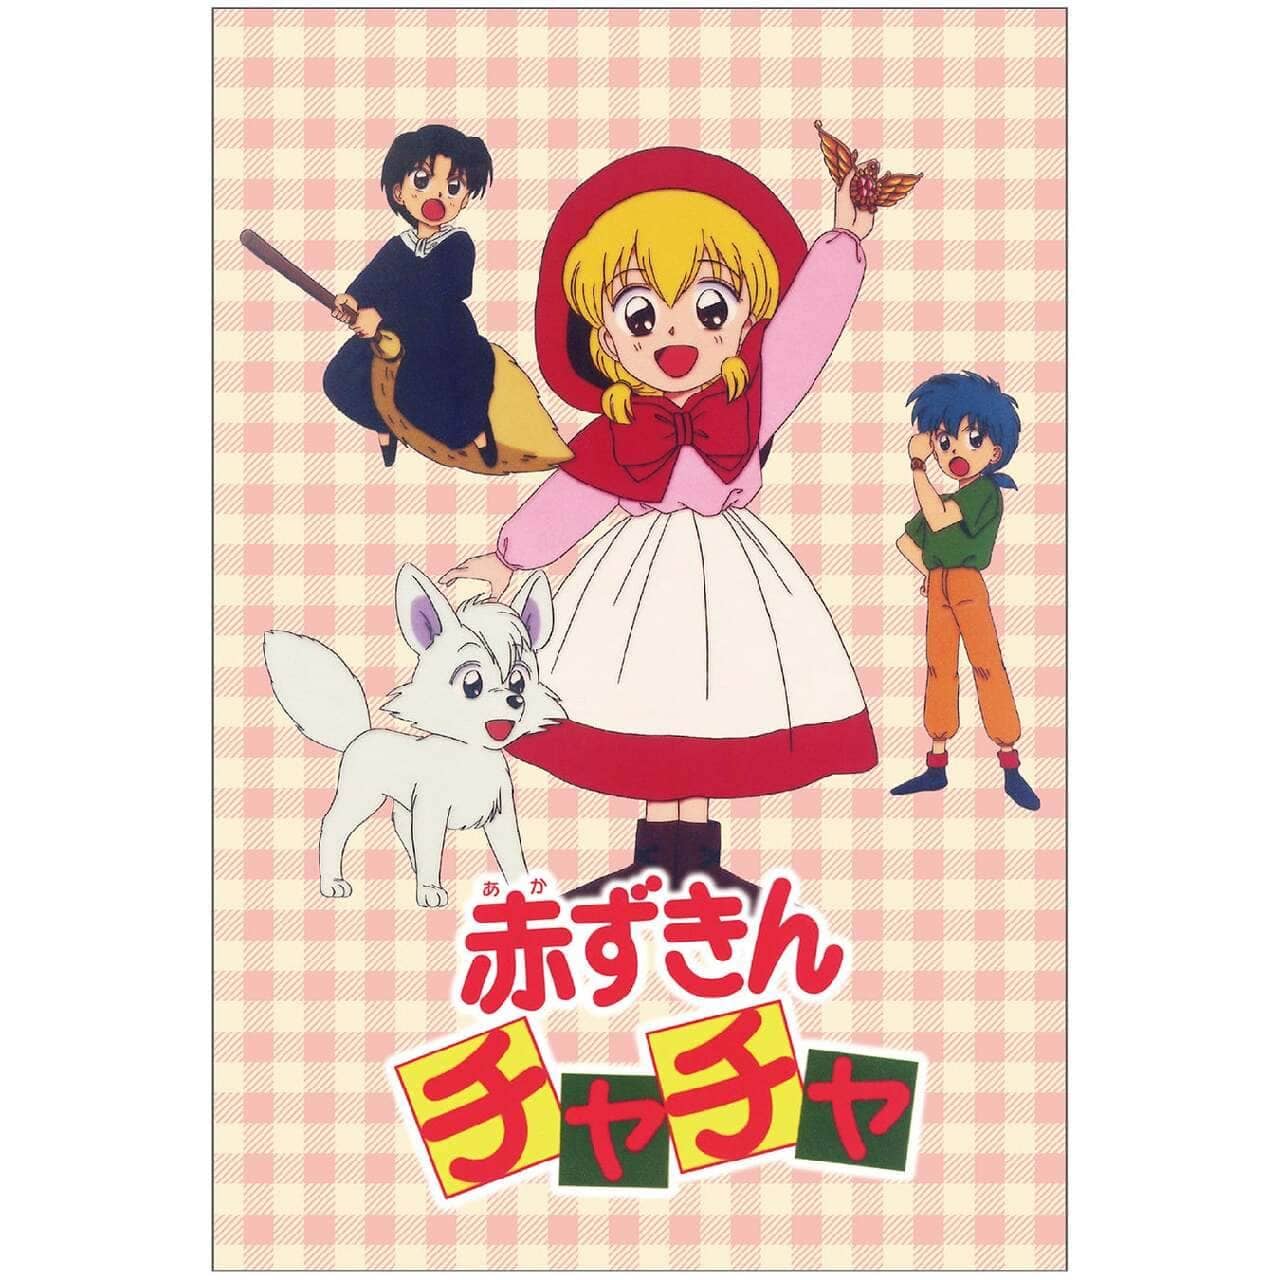 Movic has released a new product of “Akazukin Chacha”! Nostalgic items such as mini acrylic stands and mugs are now available at Village Vanguard Online Image 1